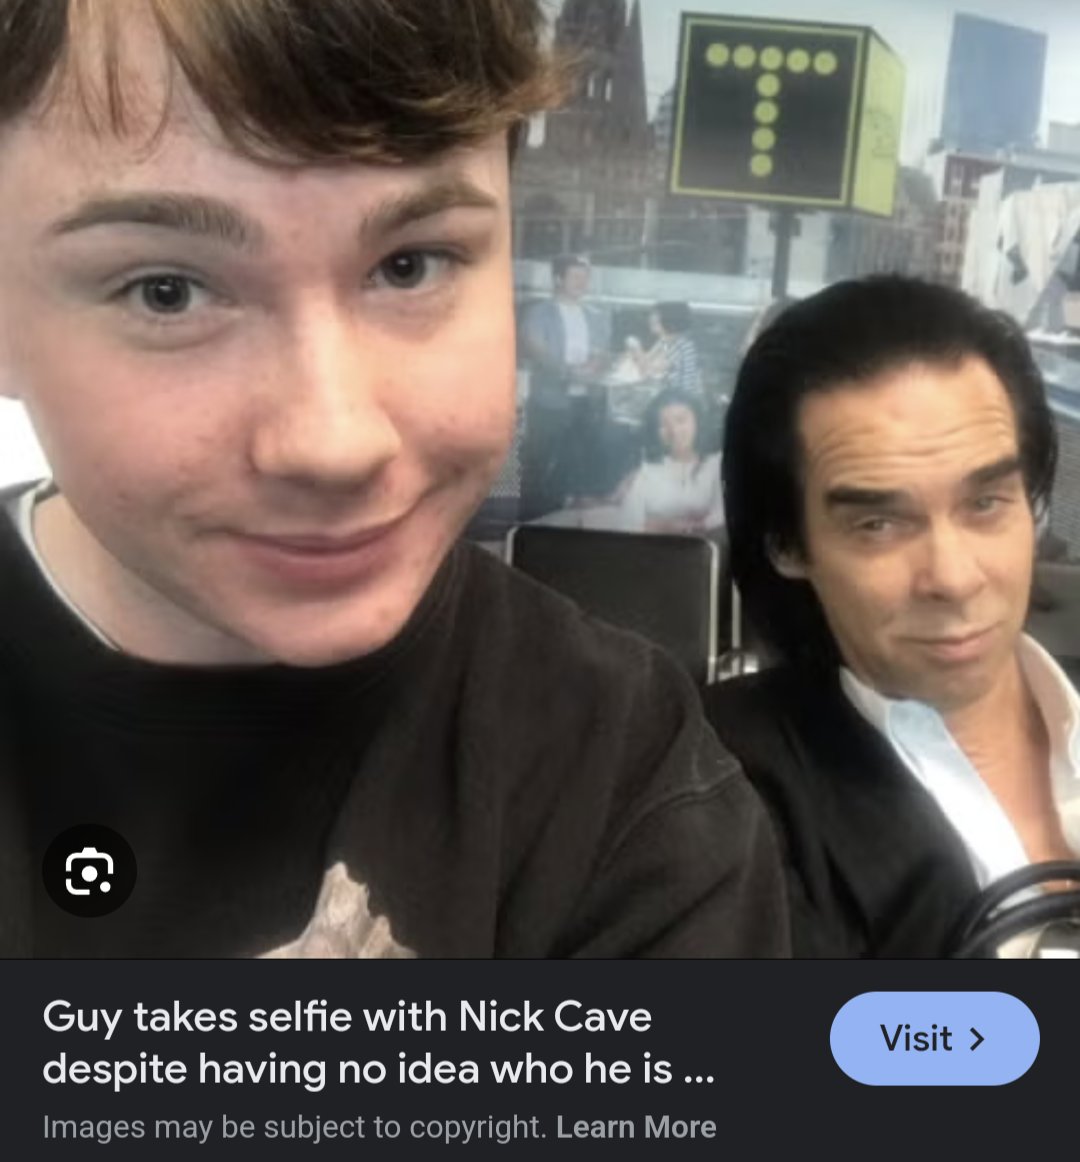 @KateRobbins @KatherineEBoyle A few years ago this kid got a selfie with Nick Cave in an airport lounge despite not knowing who he was because everyone else was doing it. 

Nick looks amused nevertheless